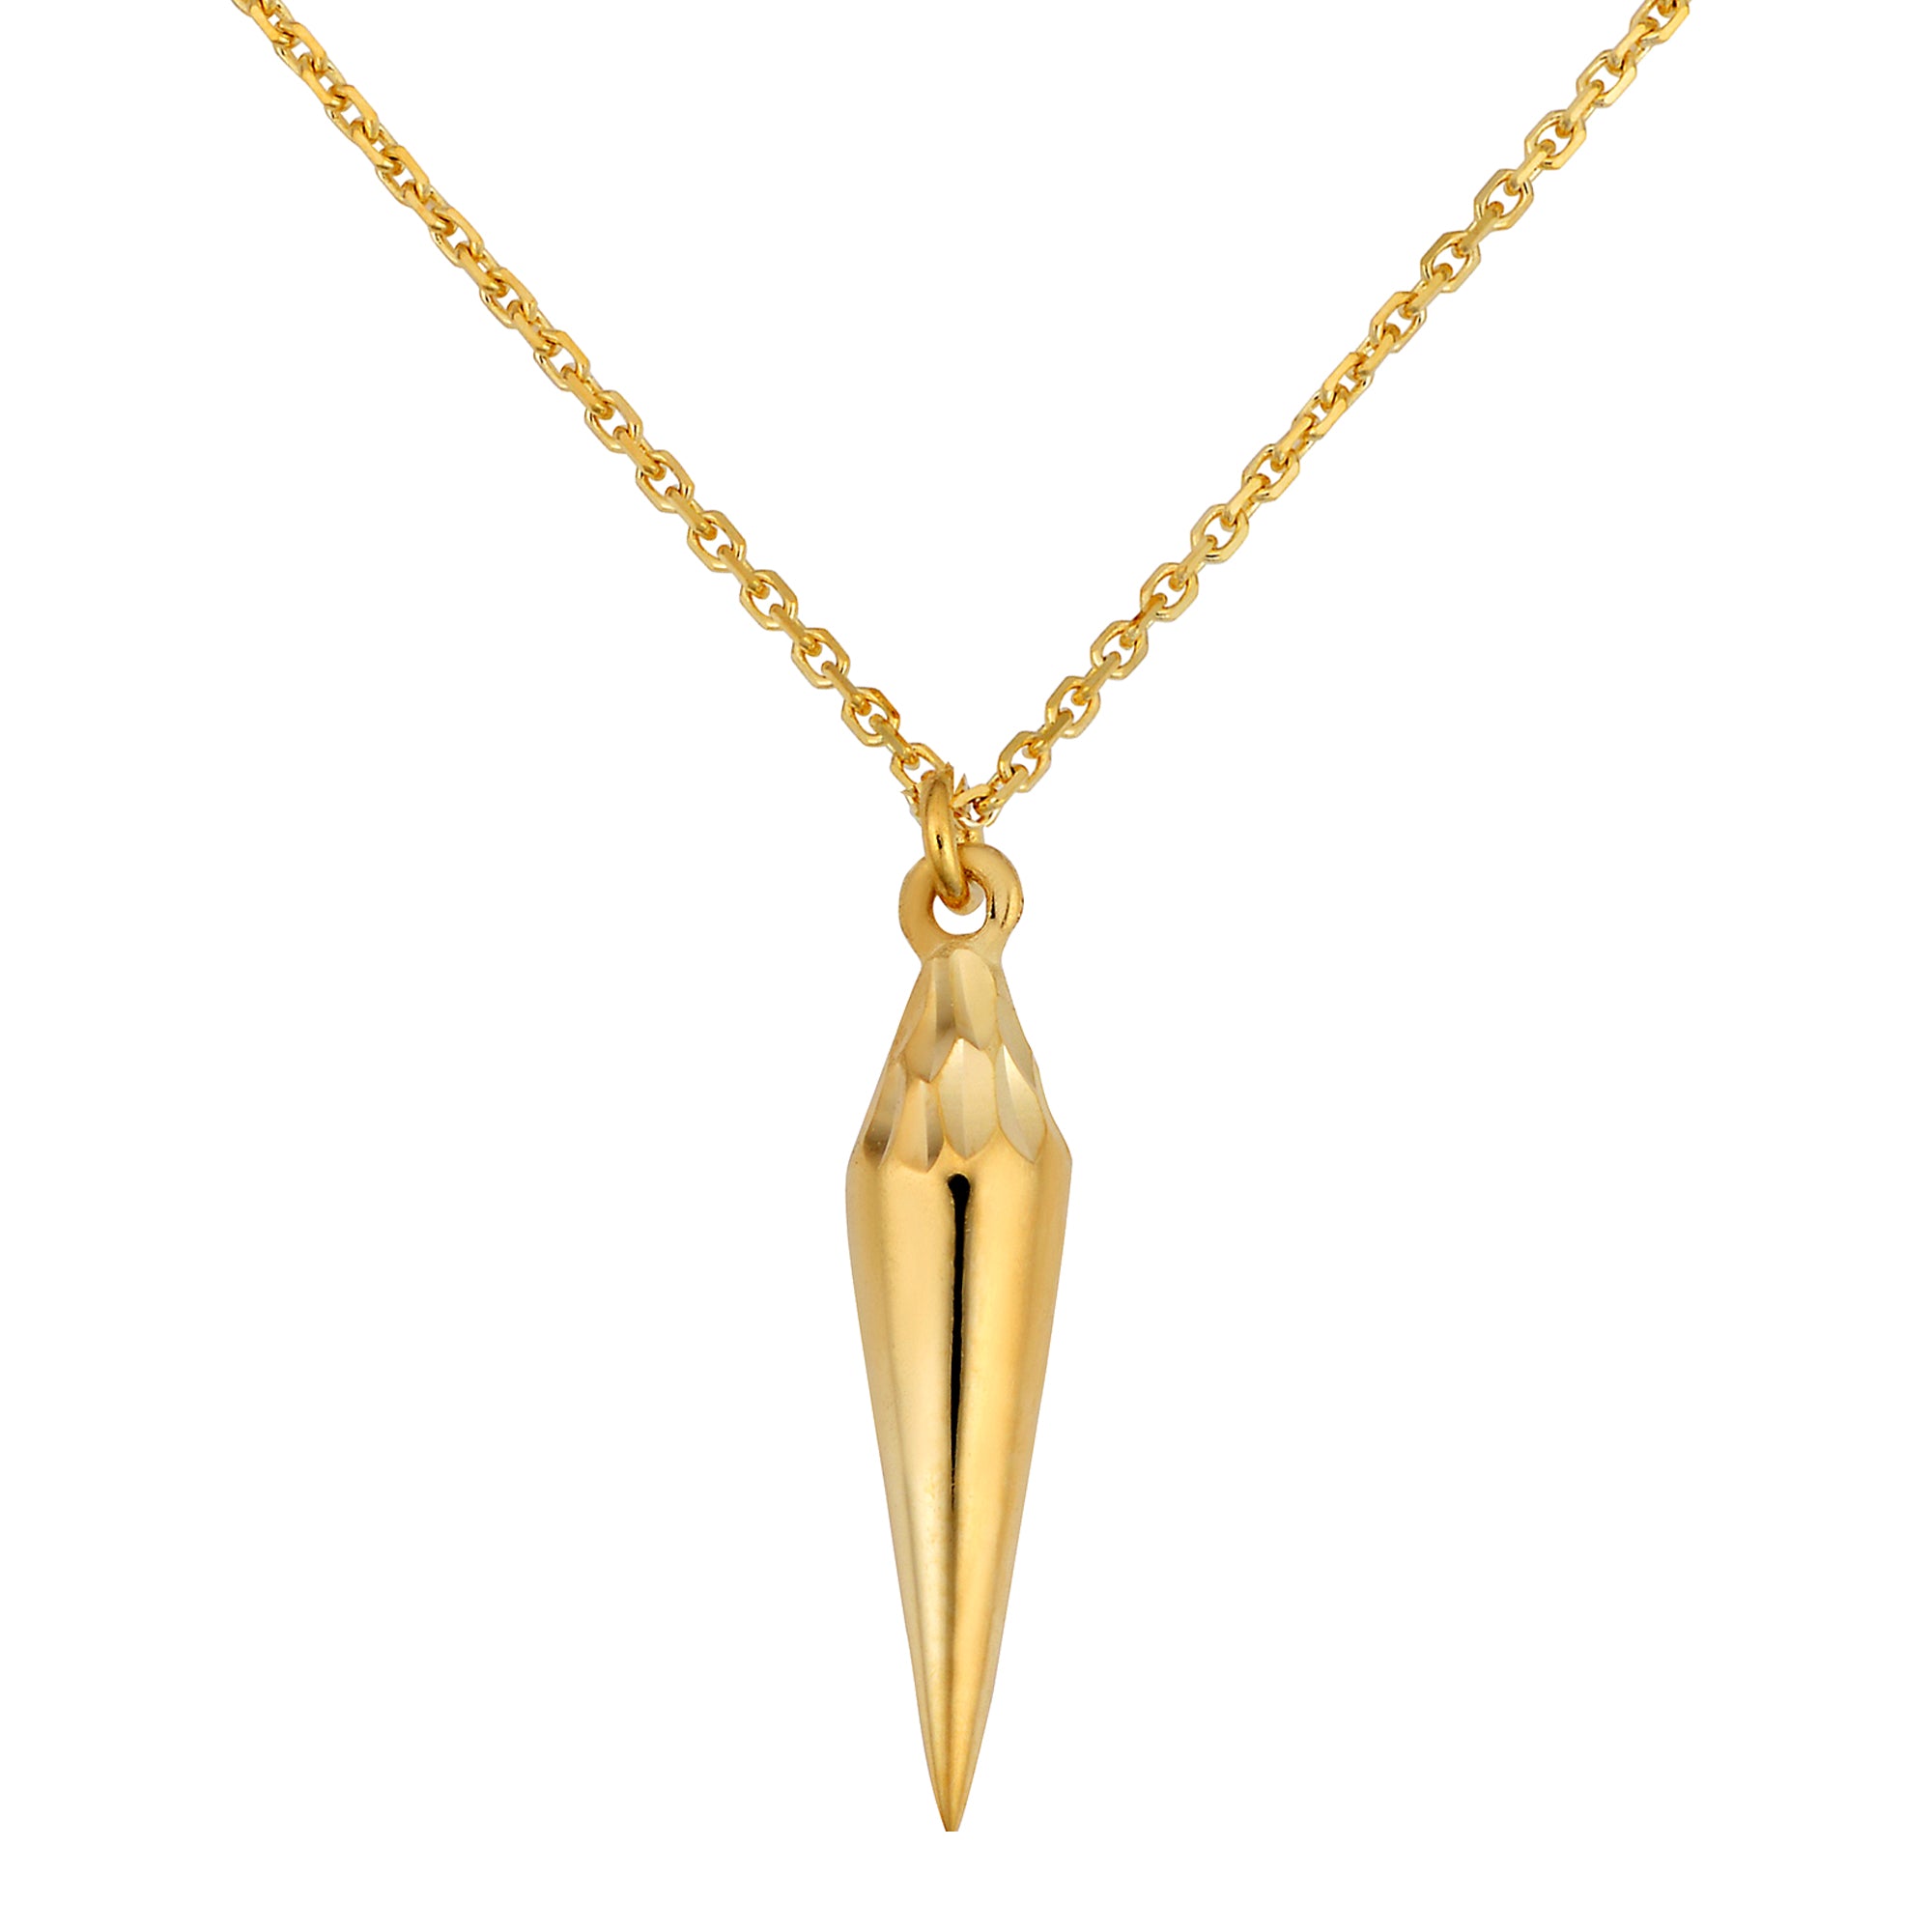 14K Yellow Gold Hypnosis Pendulum Pendant Necklace, 18" fine designer jewelry for men and women